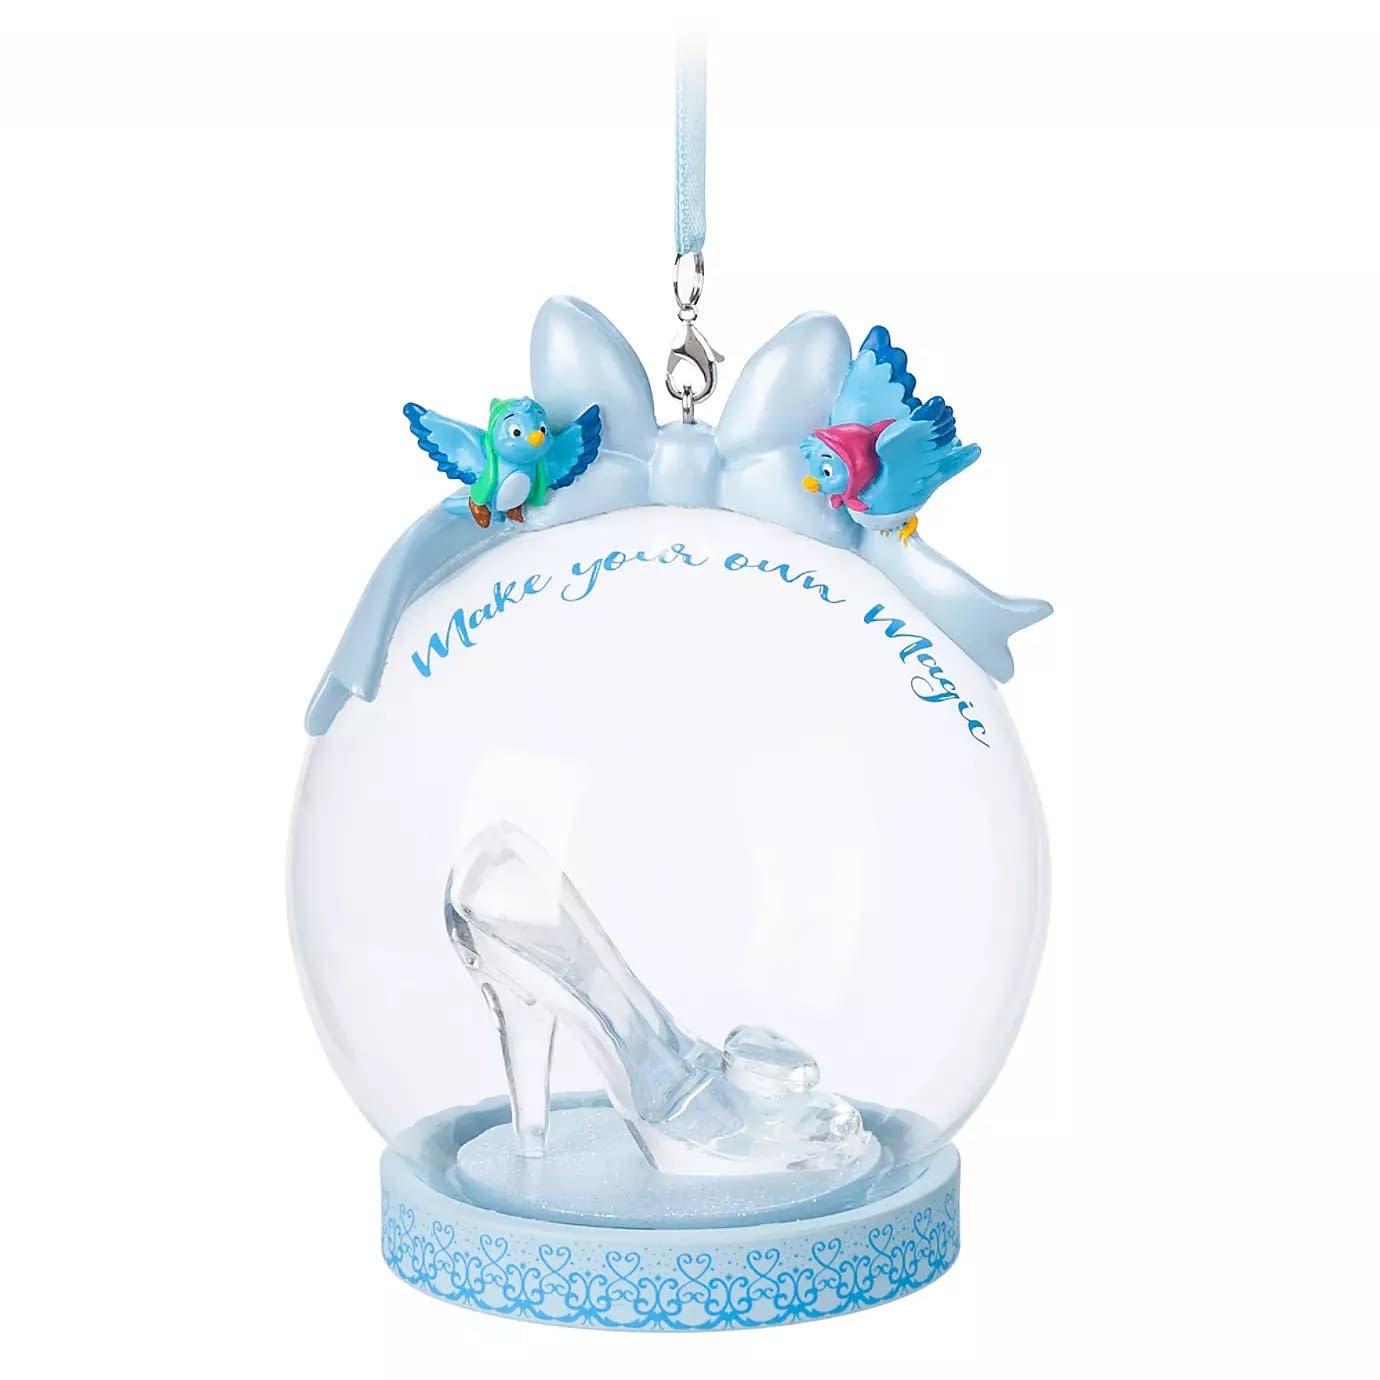 Celebrate Cinderella's 70th at home with these magical items!